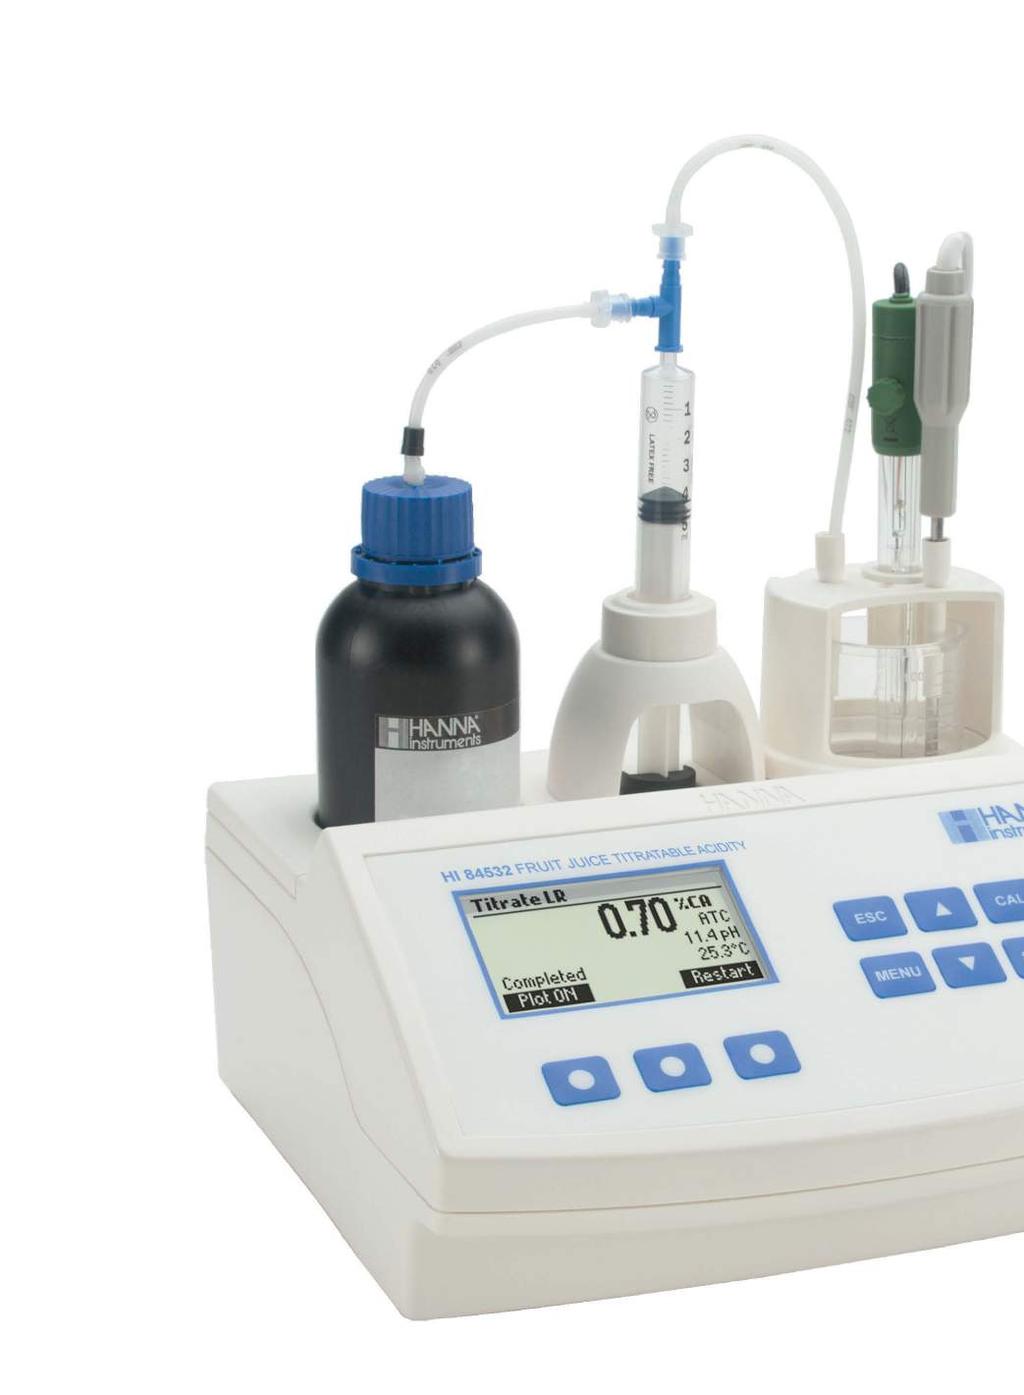 ph/mv M eter In addition to automatic titration, the HI 84532 can also be used as a ph/mv meter. Log-on-Demand Log data up to 400 samples (200 for titration; 200 for ph/mv).